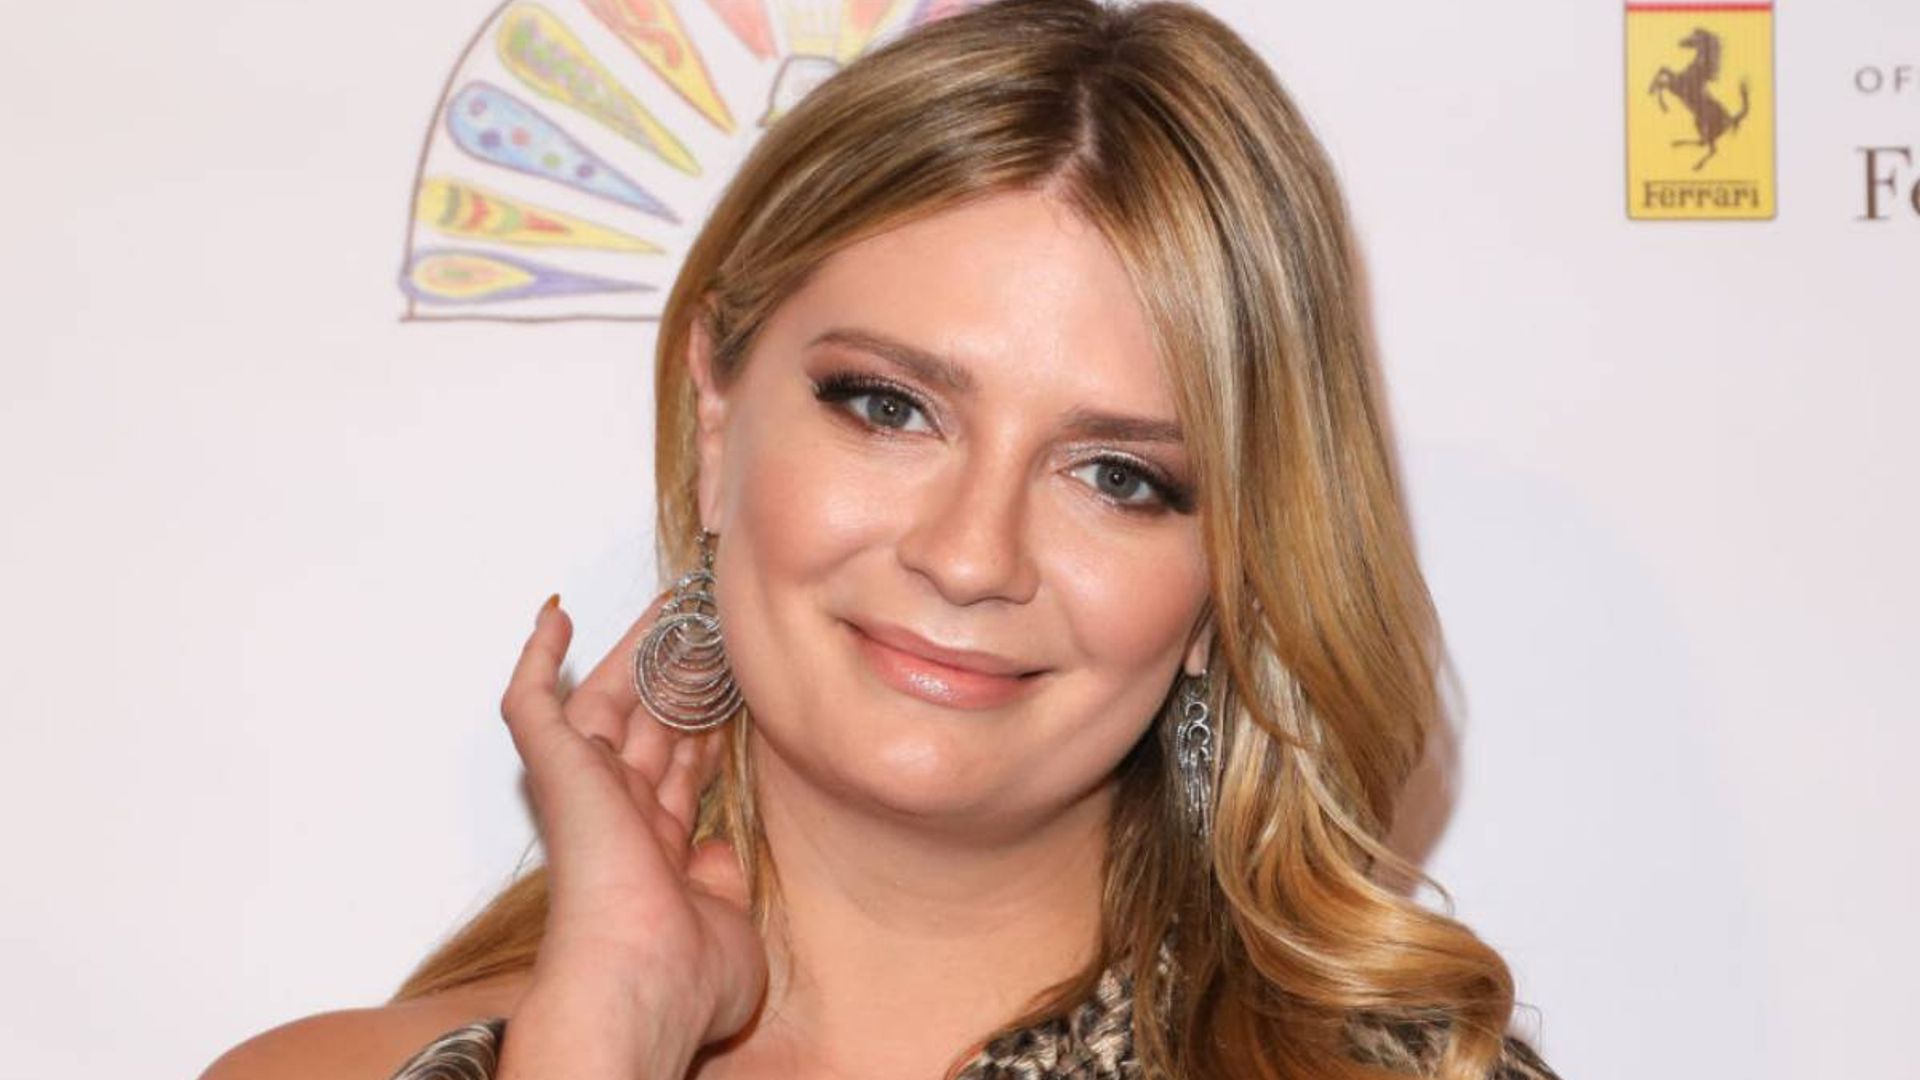 Mischa Barton shares bathtub selfie - and fans are all saying this